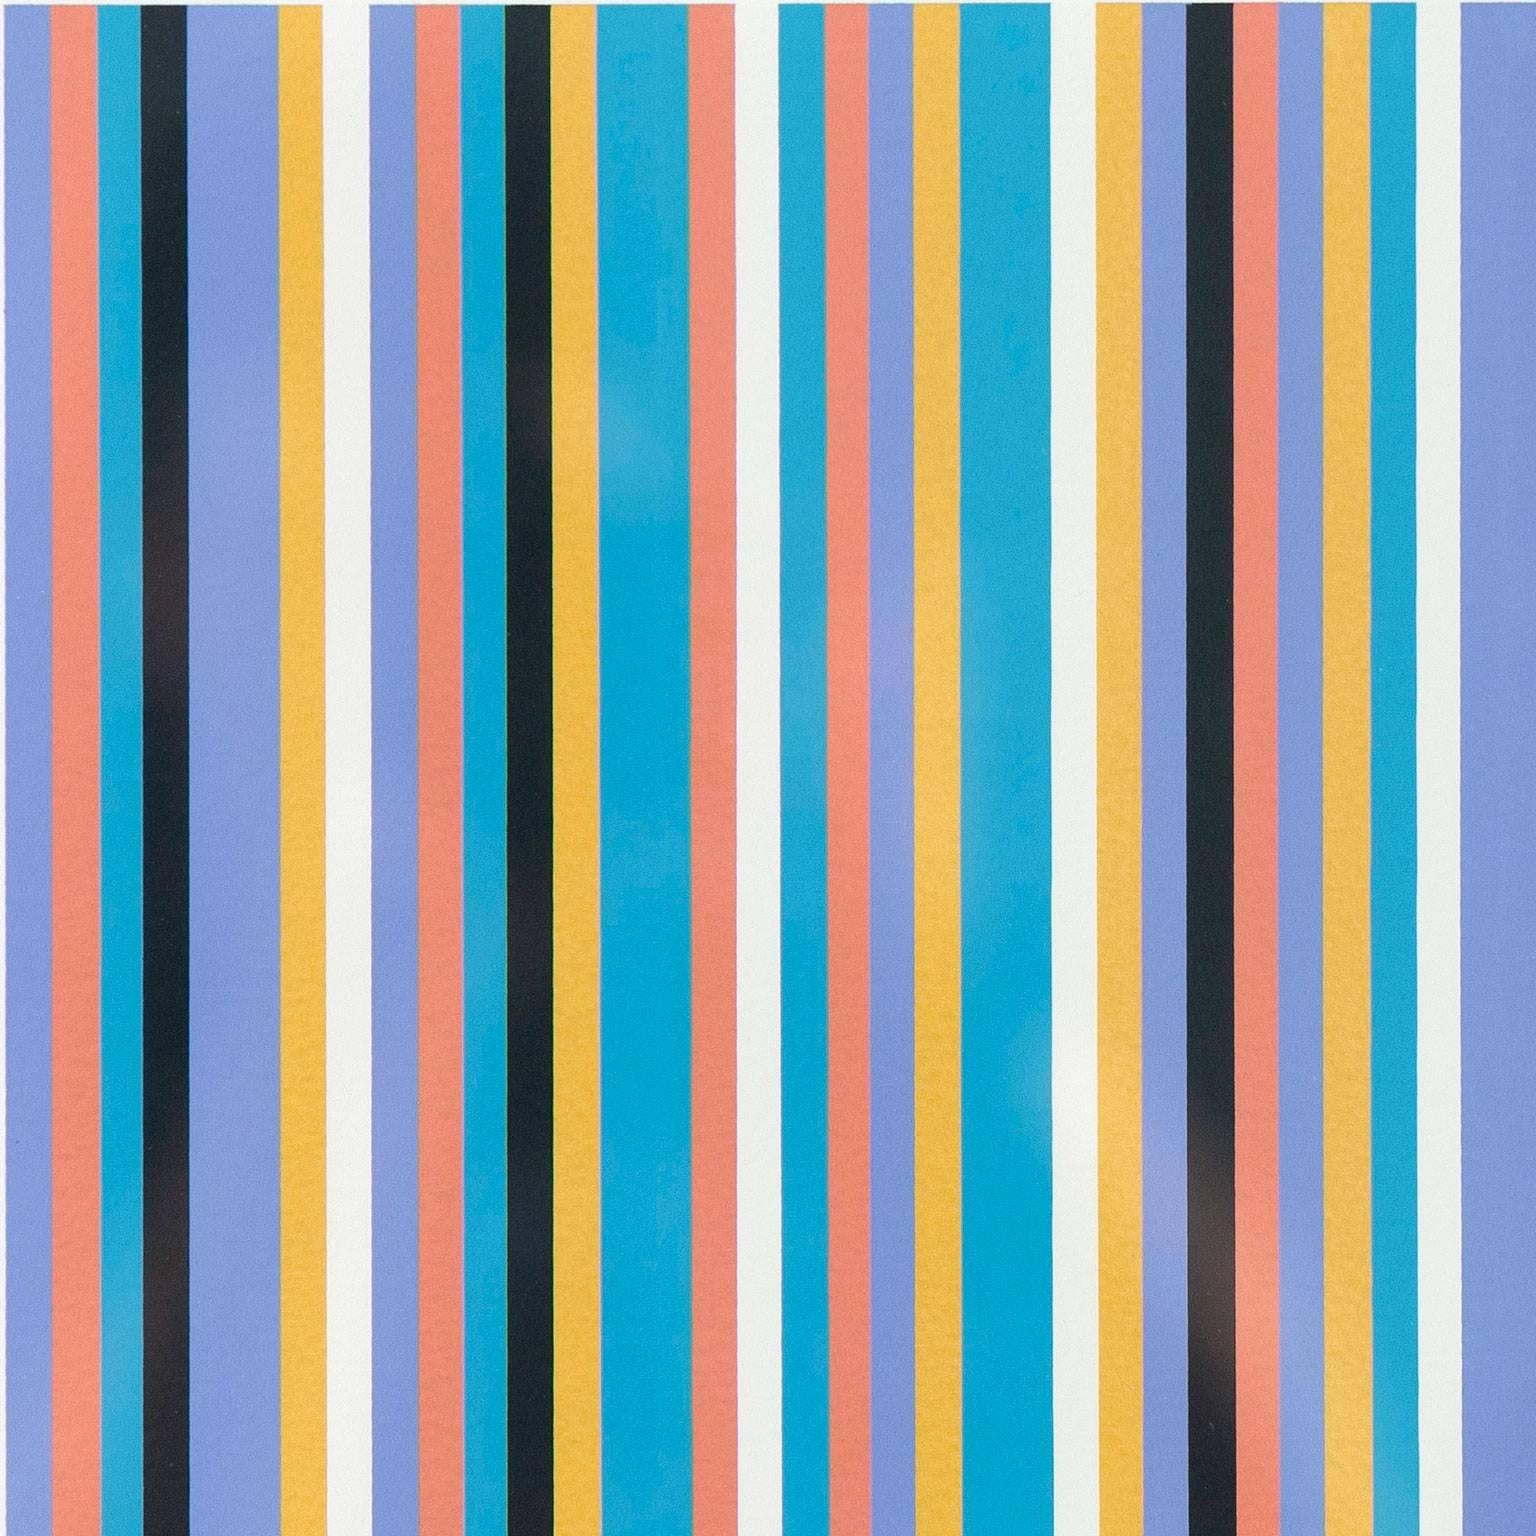 Bridget Riley (b. 1931) is an influential British abstract painter who came to prominence in the 1960's during the American Op Art movement.

Riley first gained international recognition in 1965 when her work was exhibited in the MoMA